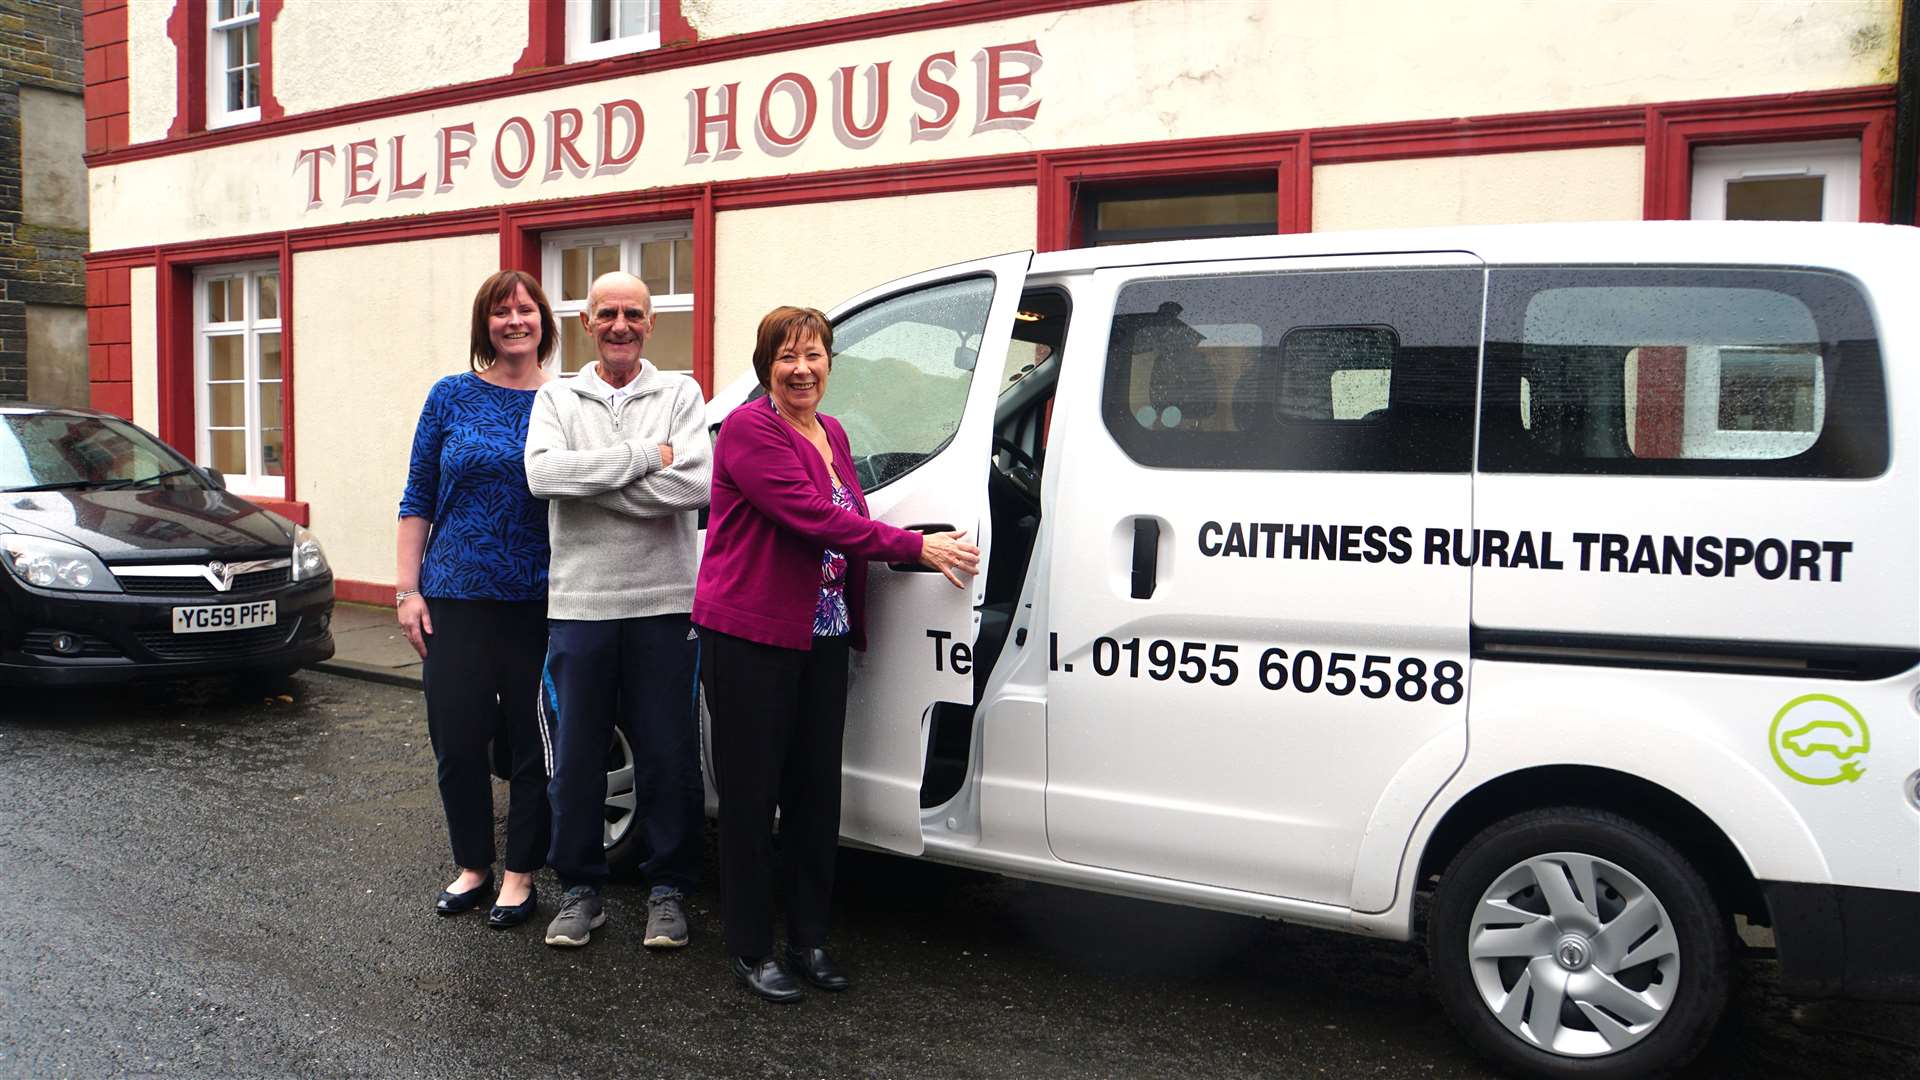 From left, Valerie MacKenzie, Alan Farquhar and Coreen Campbell of Caithness Rural Transport with the new eco-friendly bus. Picture: DGS